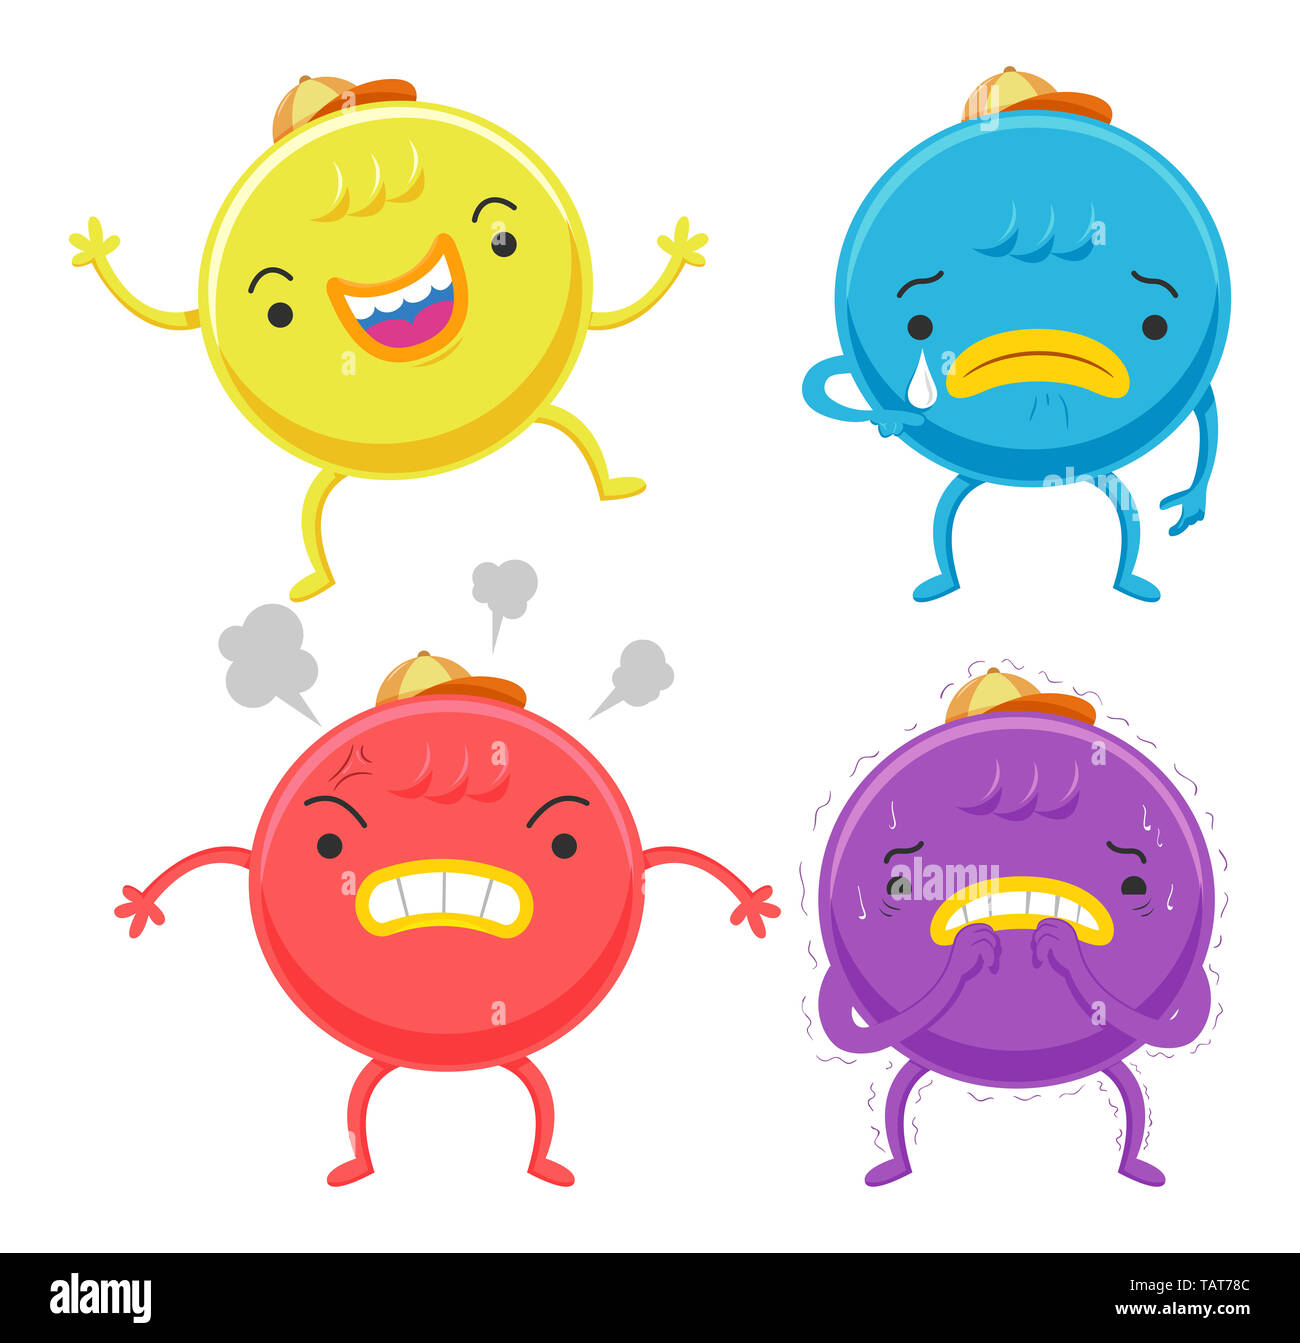 Illustration of Cute Circle Monsters Showing Different Emotions from Happy, Sad, Angry and Scared Stock Photo